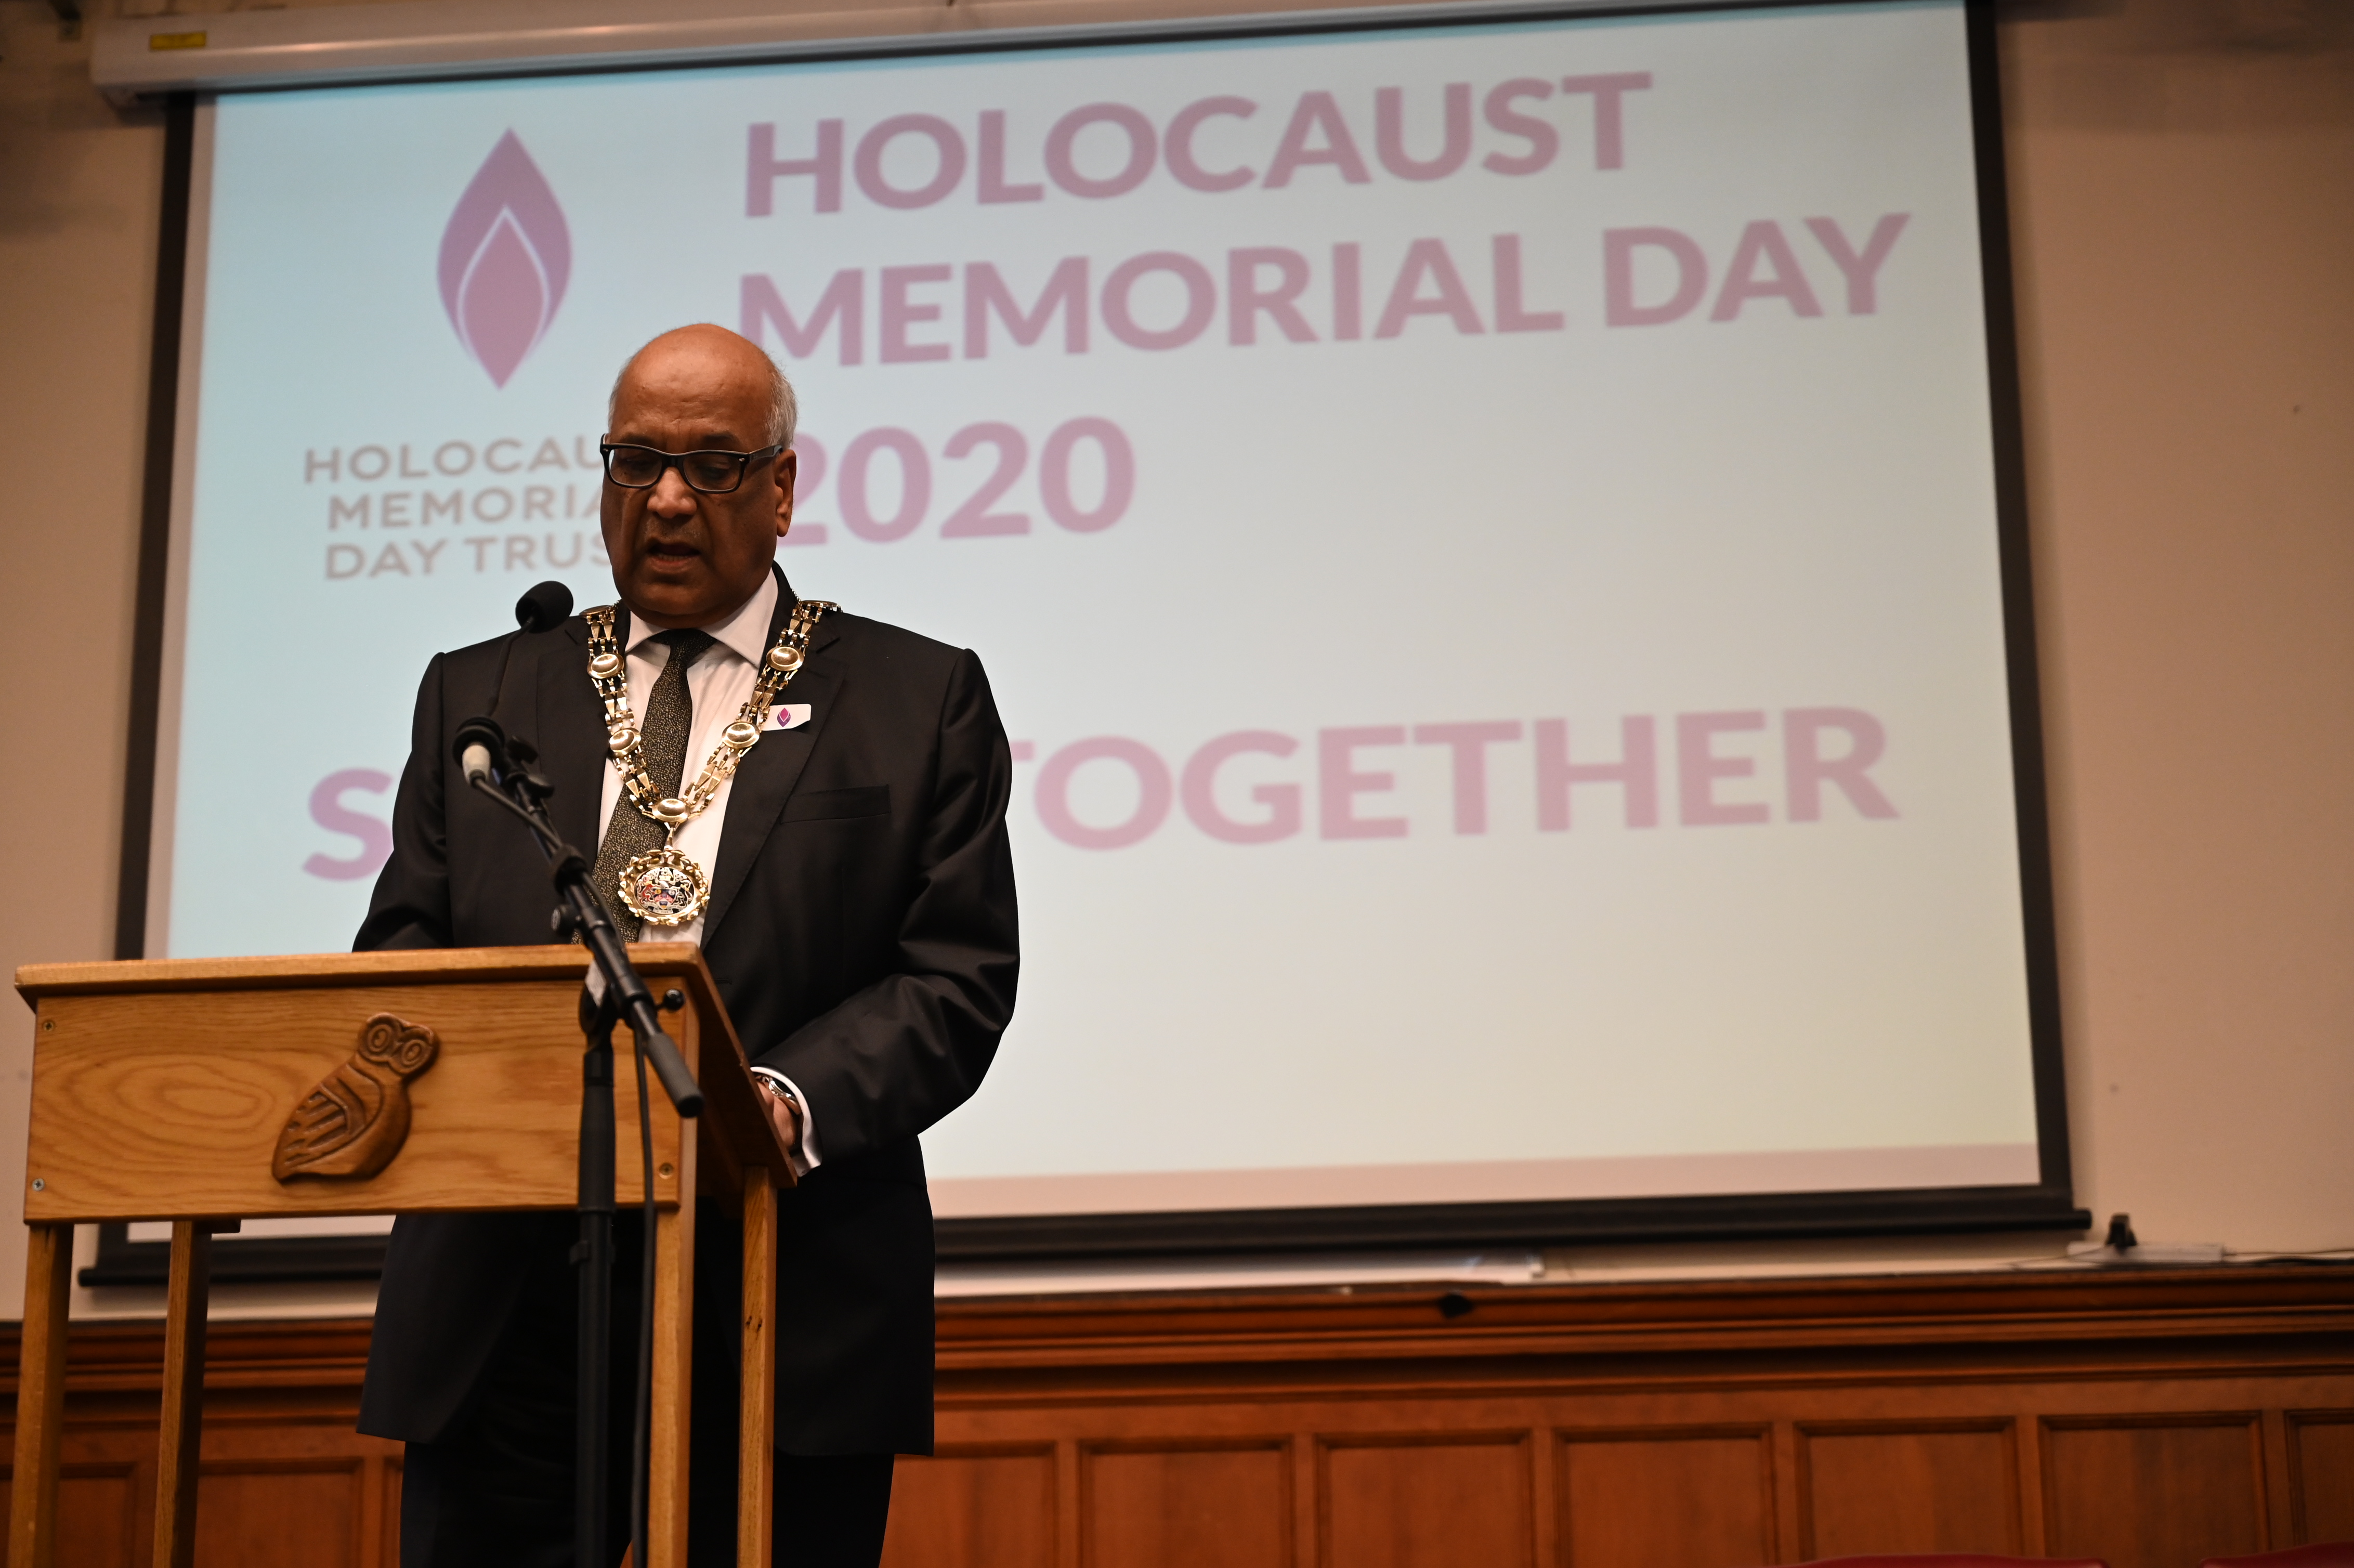 The Mayor of Sutton speaking at our Holocaust Memorial Event